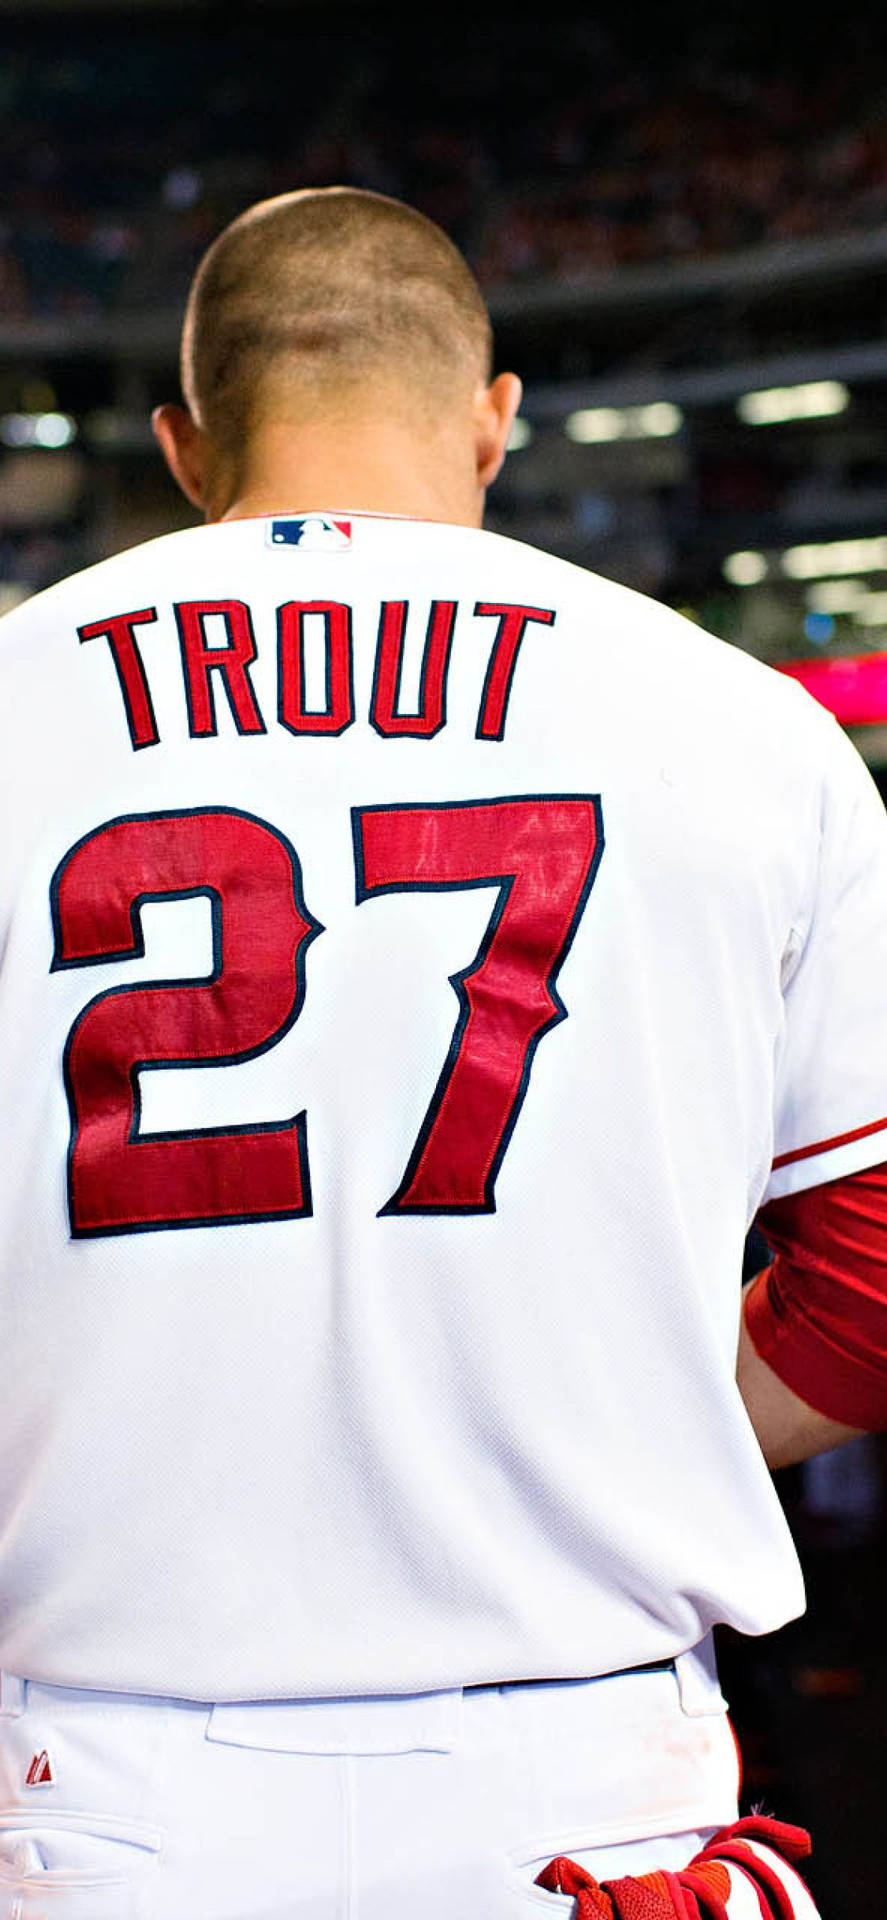 mike trout jersey wallpaper